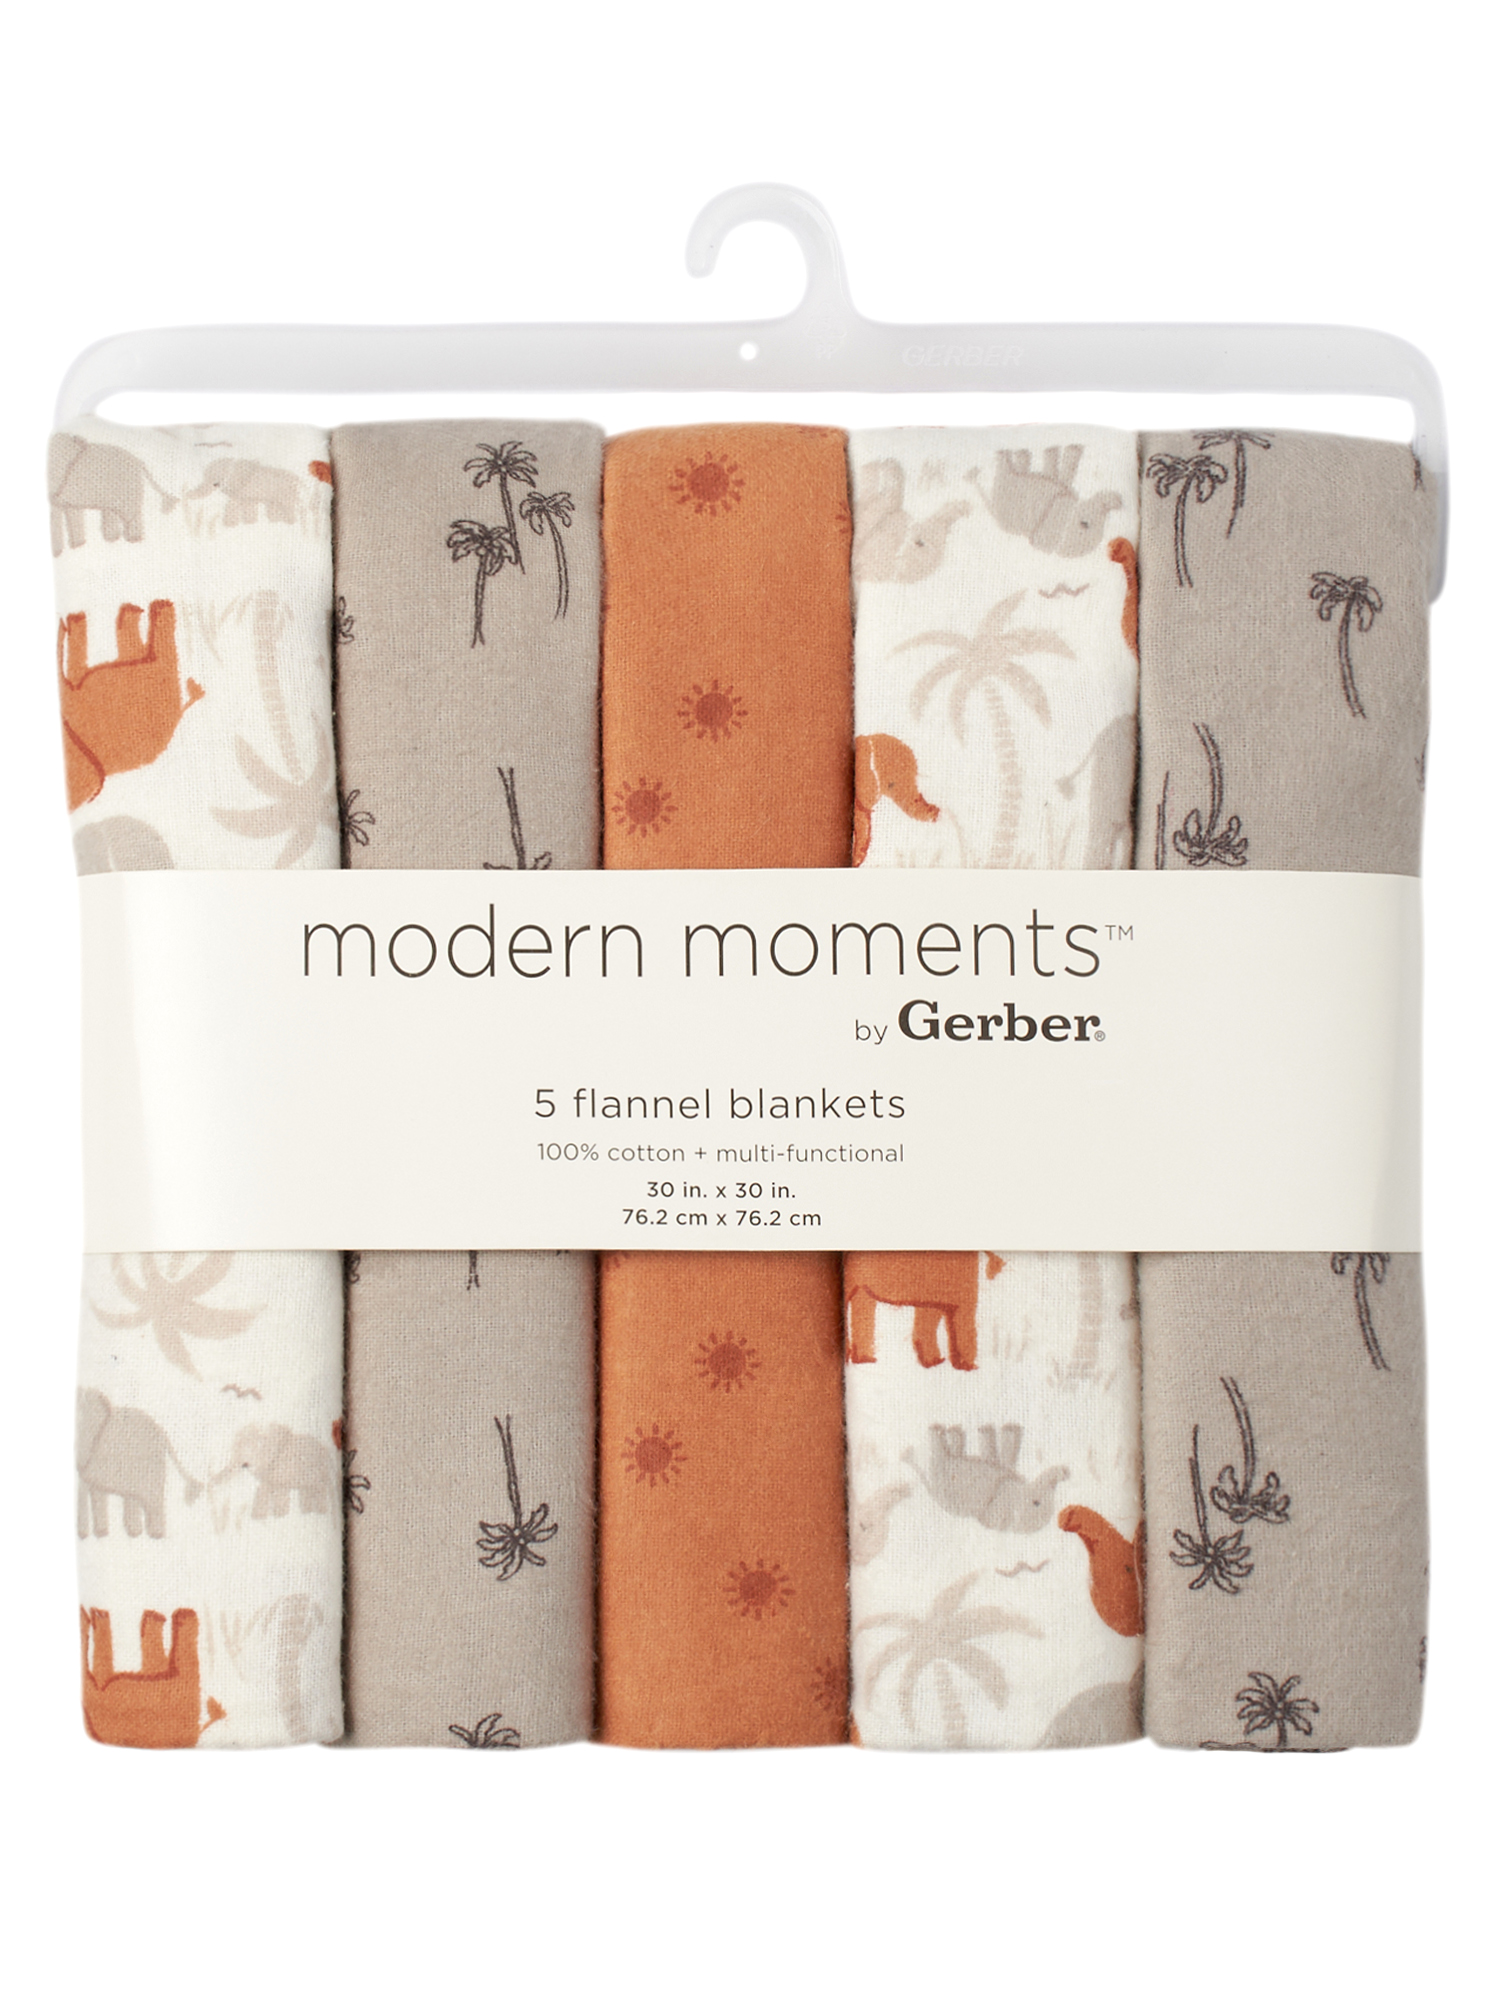 Modern Moments by Gerber Baby & Toddler Boy Flannel Blankets, 5-Pack, Grey Elephant - image 3 of 9